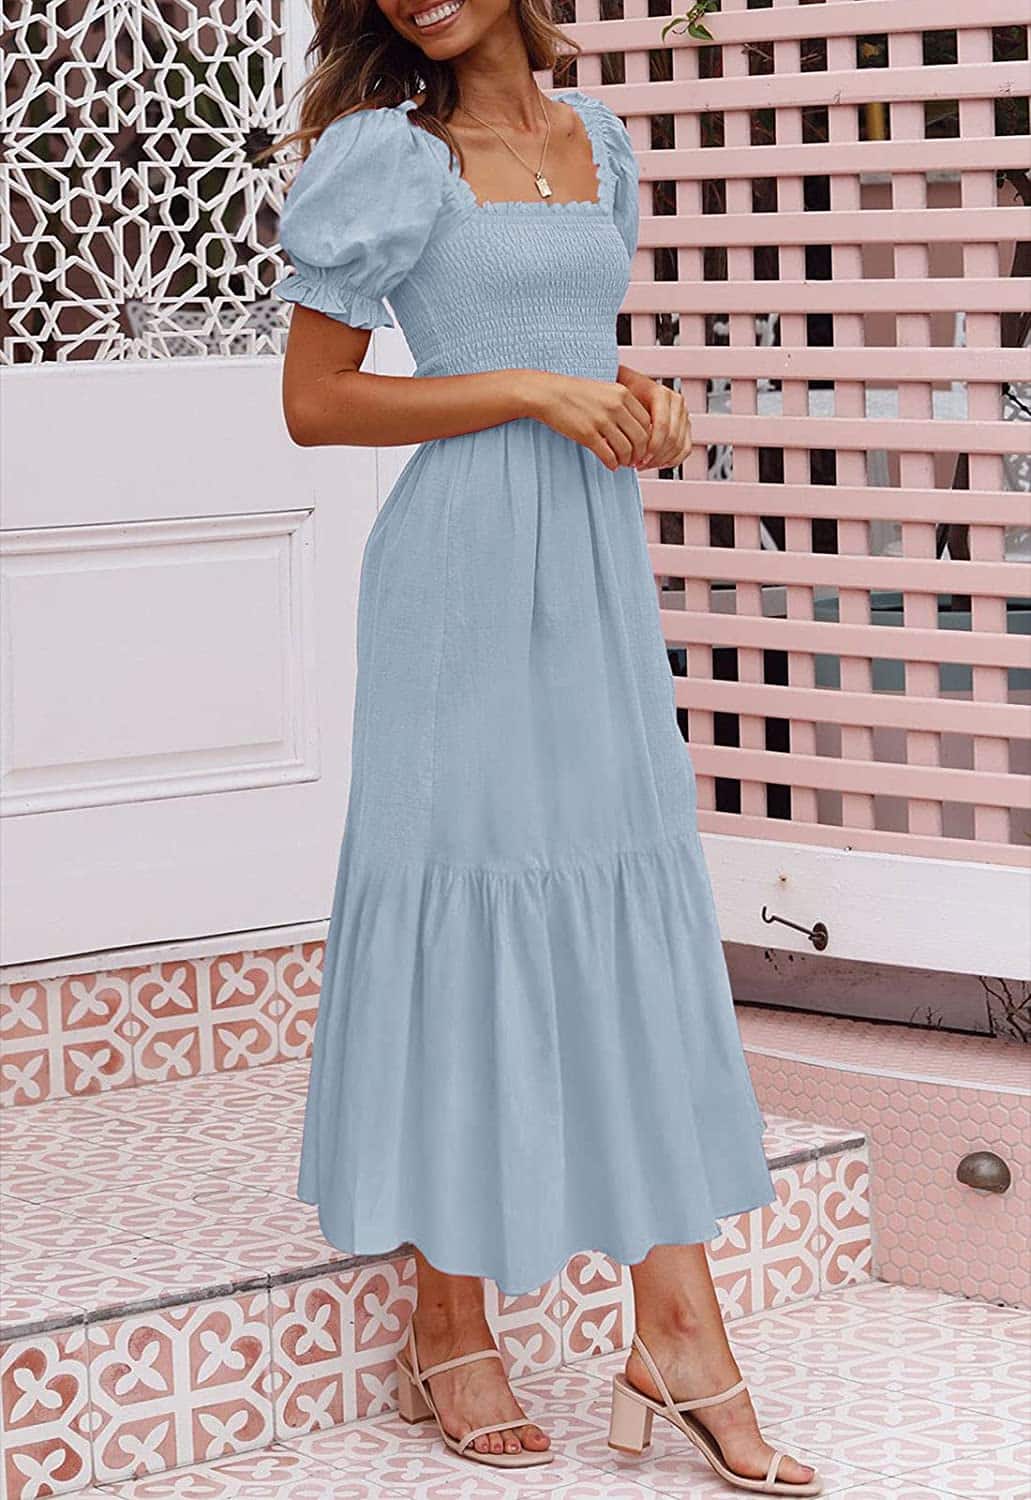 Celebrate with Easter dresses for women. | The Dating Divas